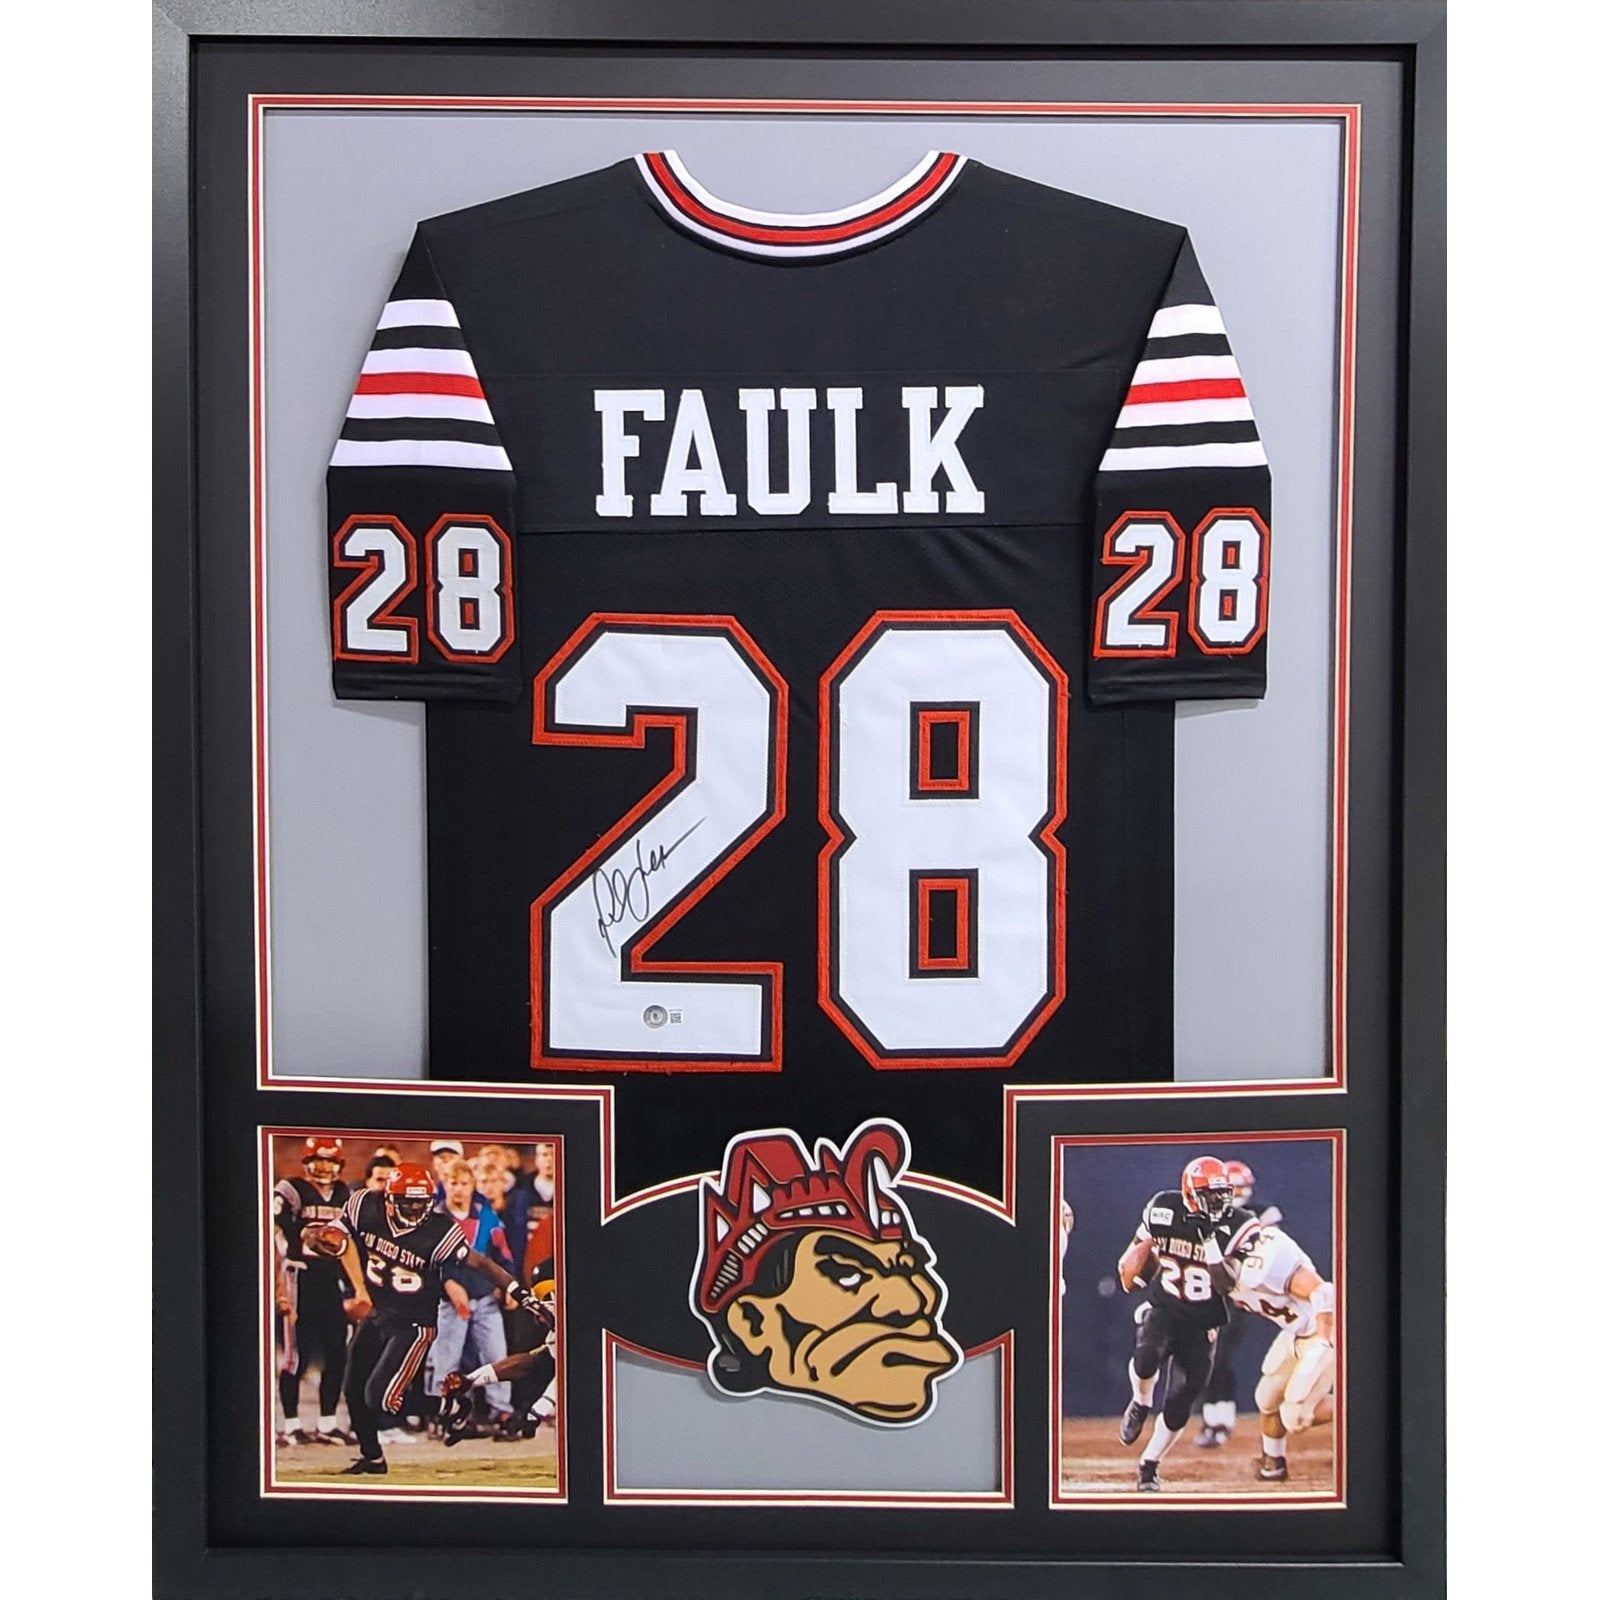 Marshall Faulk Framed Signed Jersey Beckett Autographed San Diego State Rams